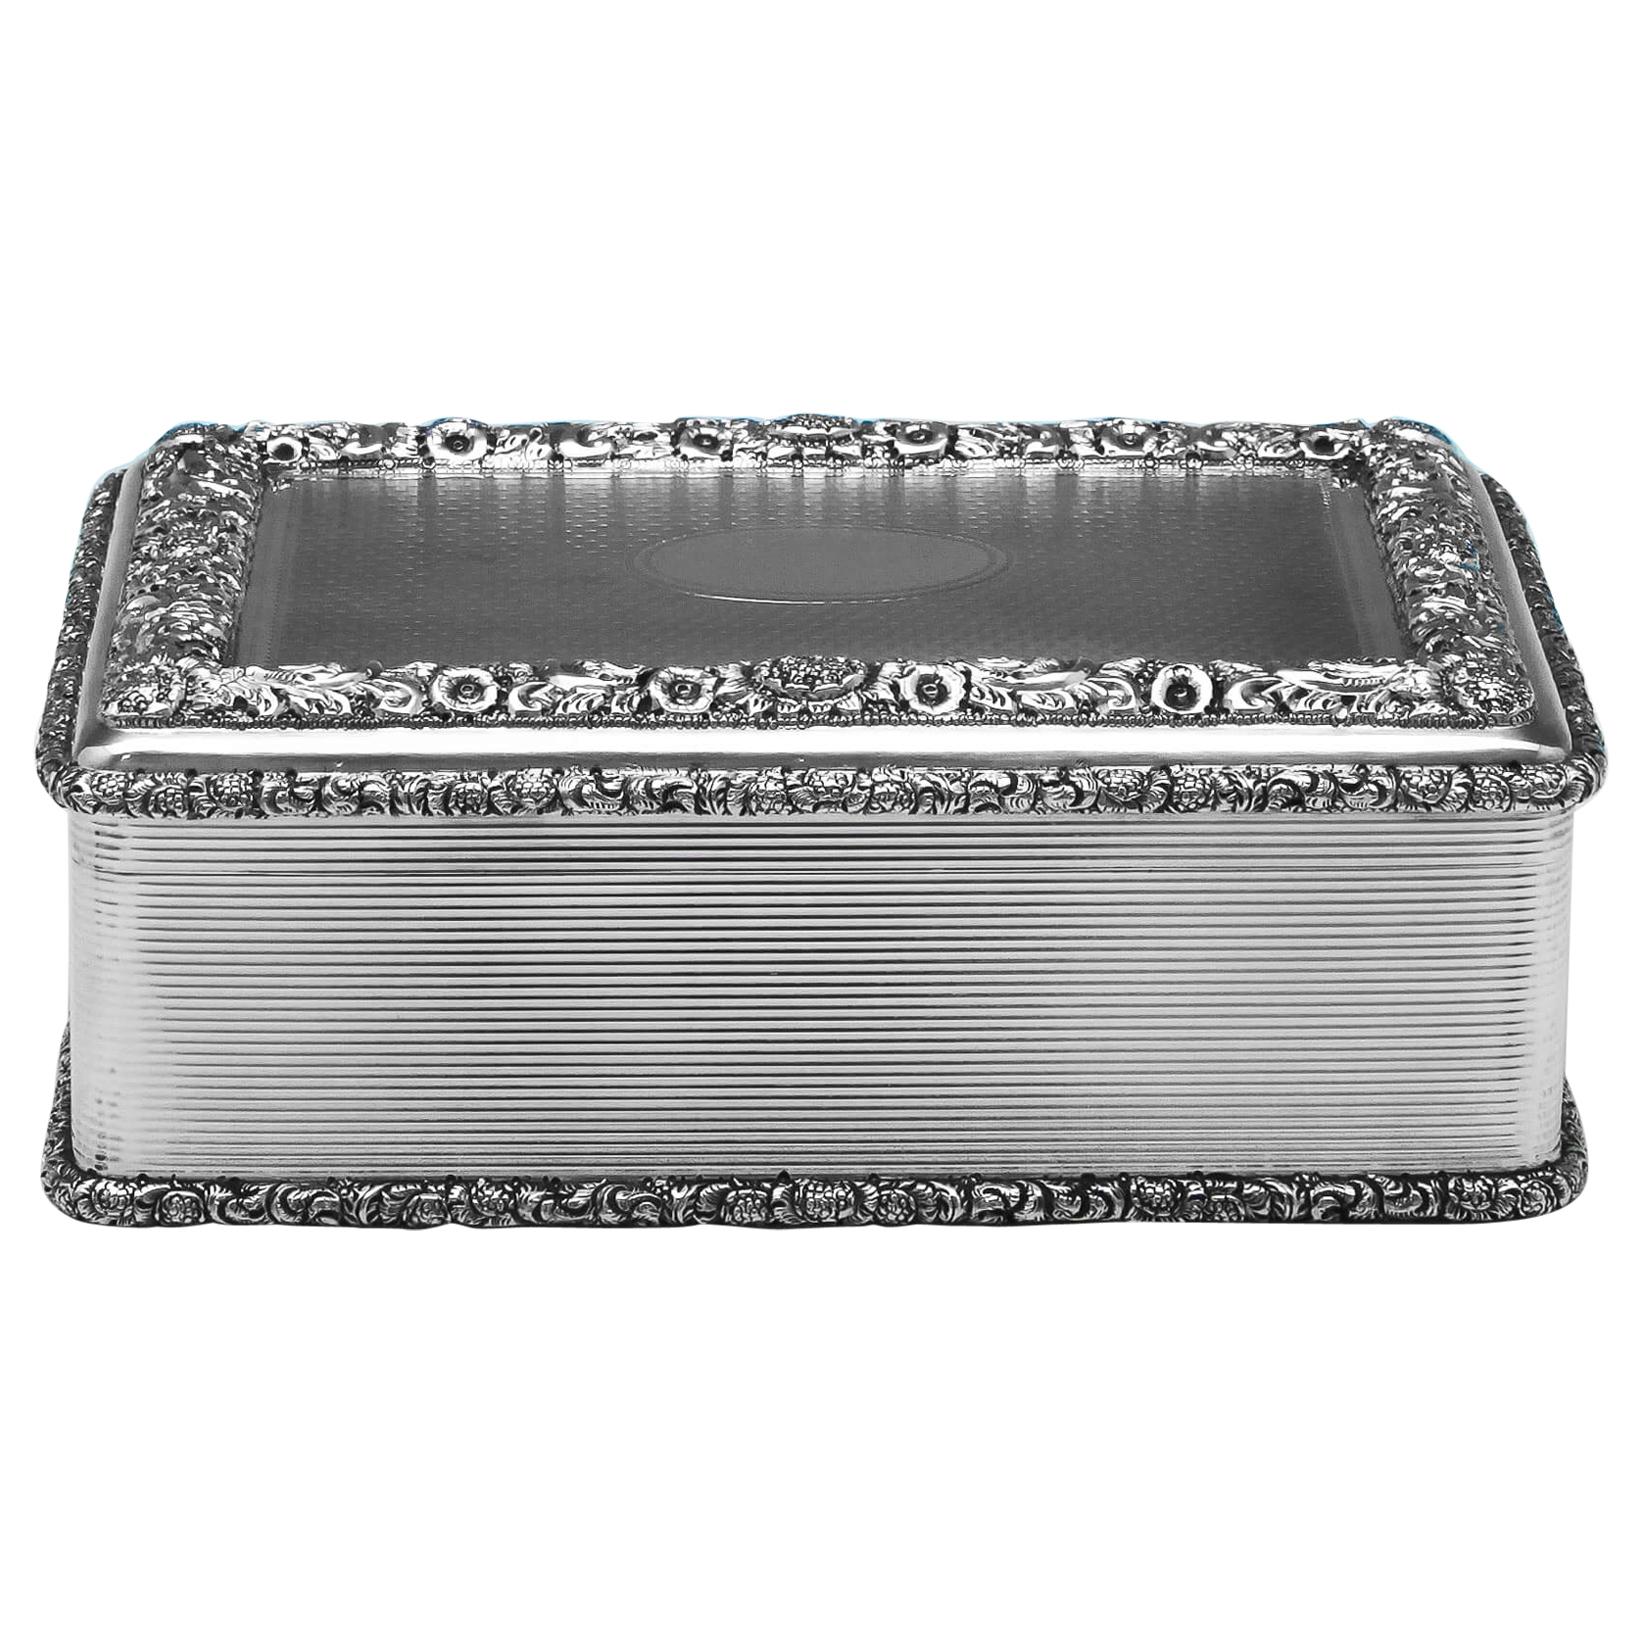 Antique Sterling Silver Table Snuff Box from 1911 by D. & J. Wellby